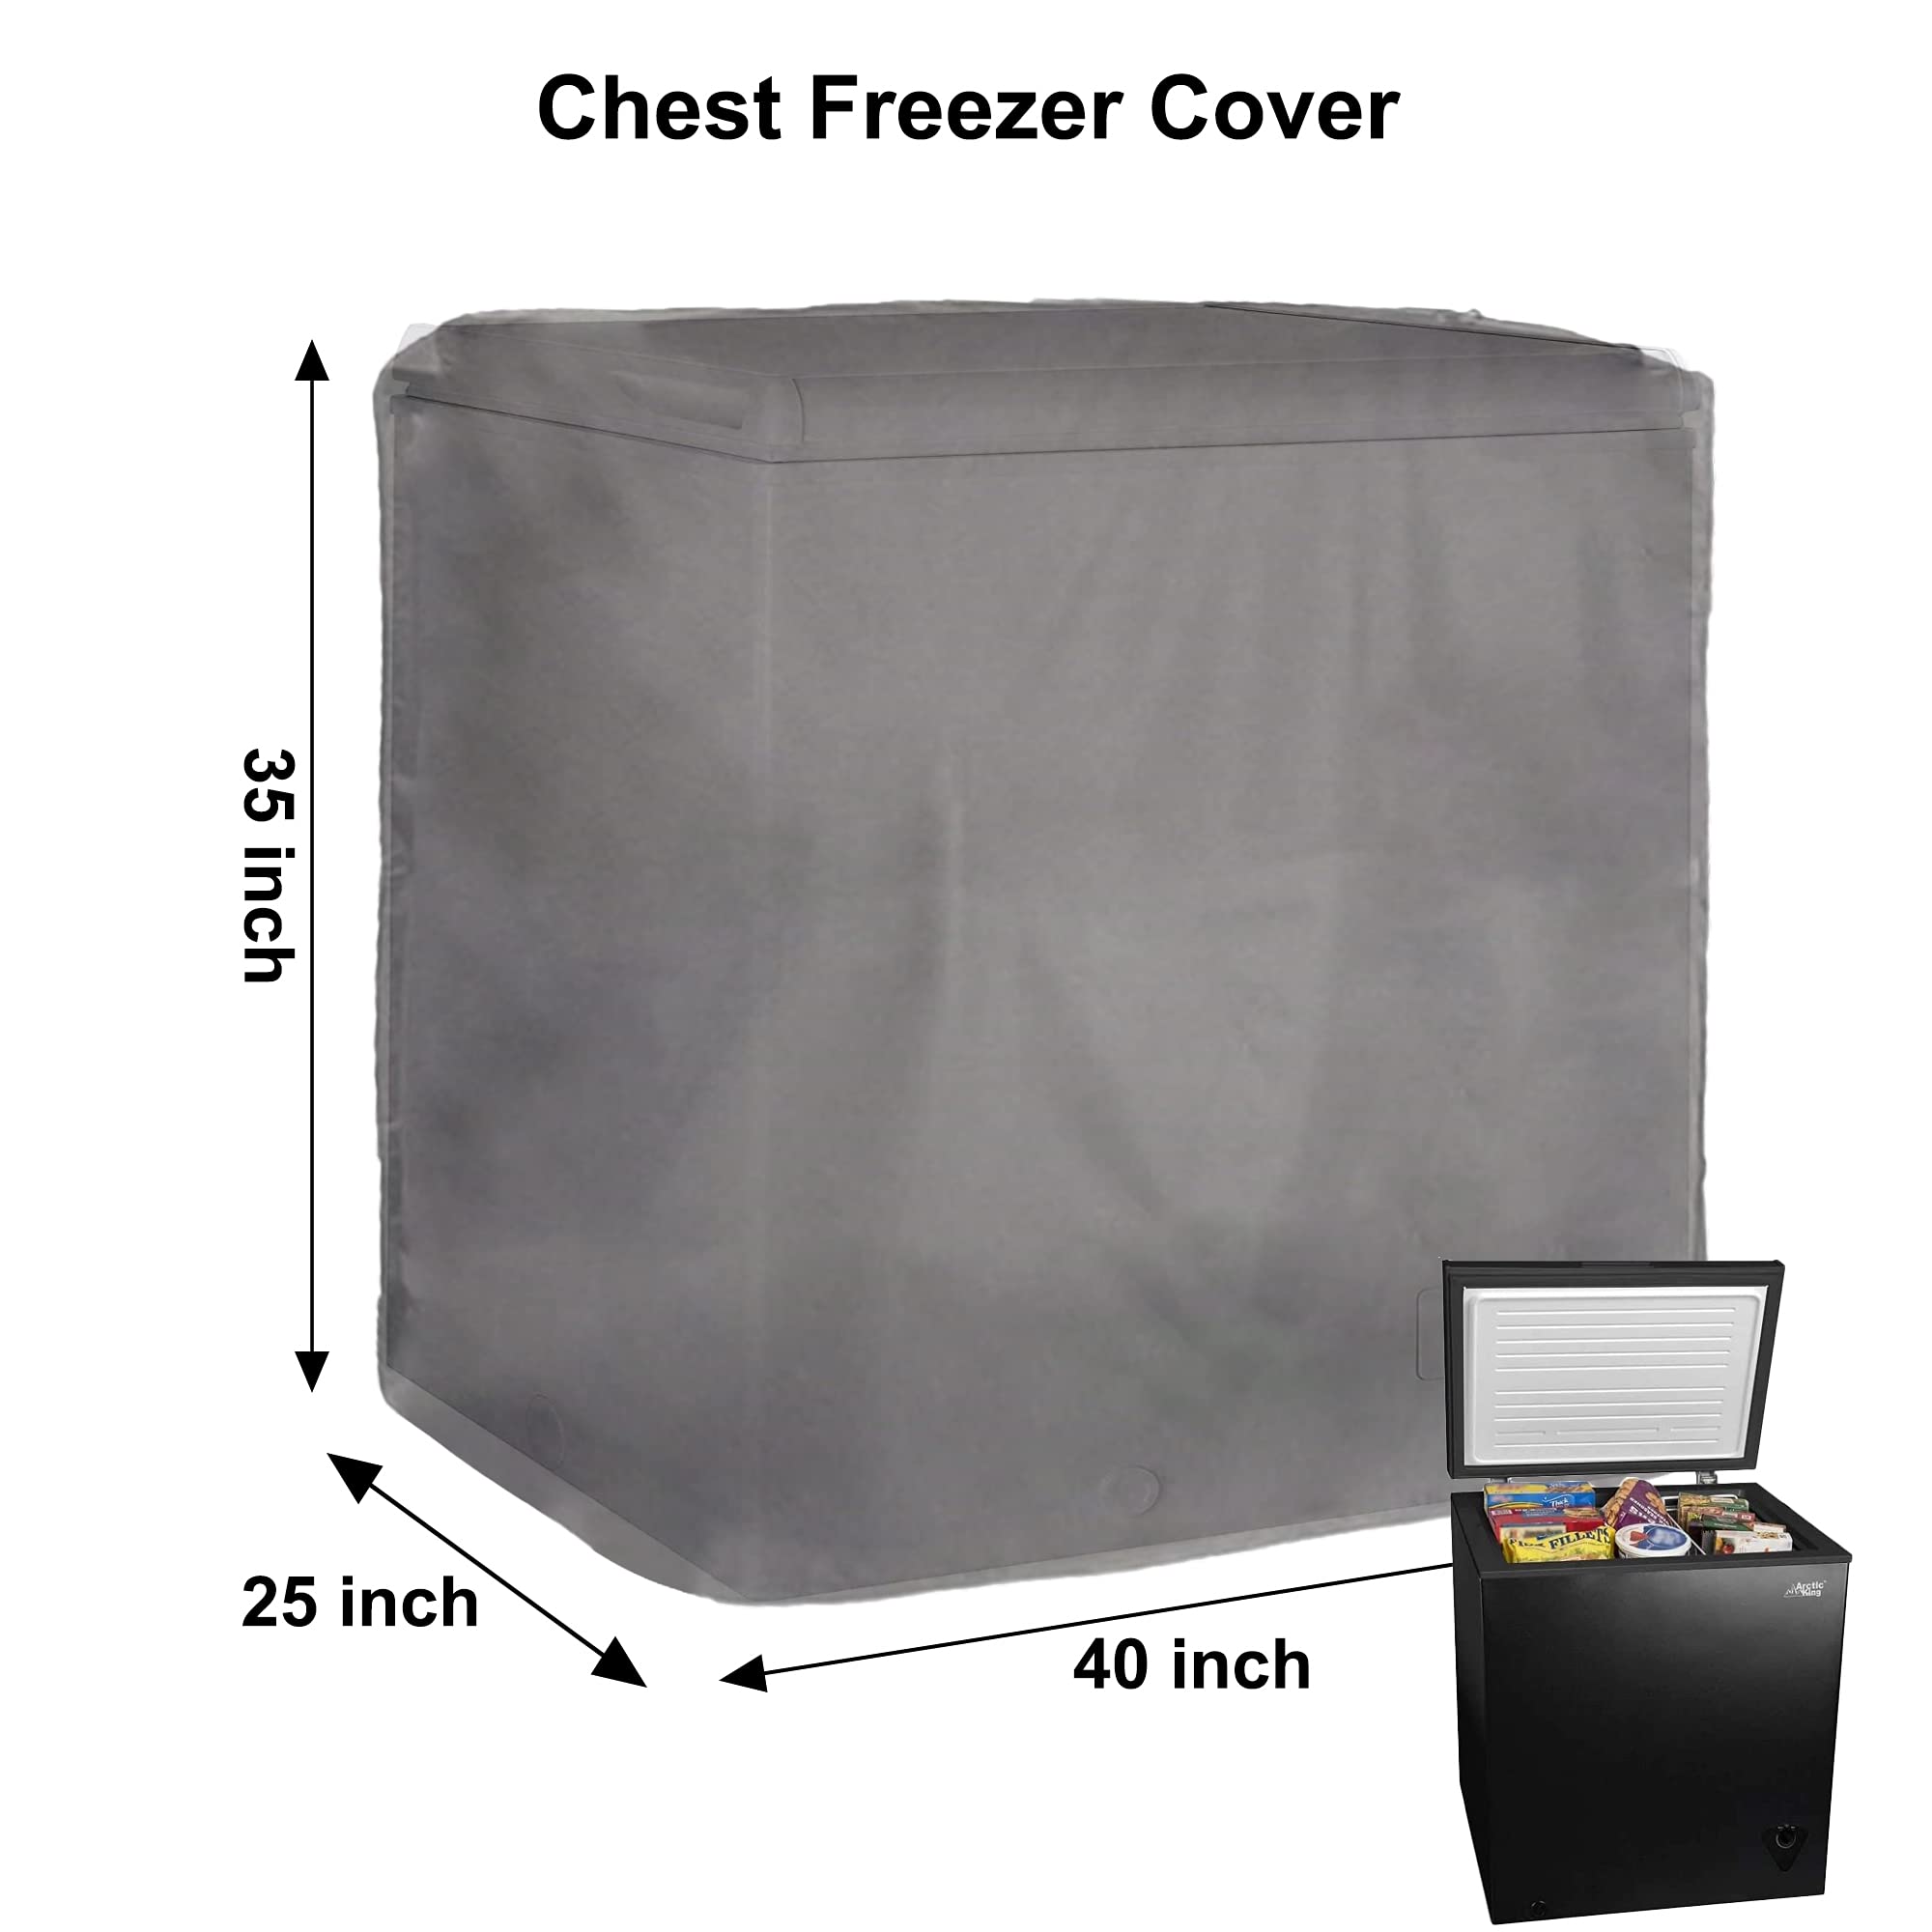 Chest Freezer Cover,Waterproof Dustproof Outdoor or Indoor Protect Deep Freezer Cover Fit for Compact Chest Freezer 7.0 Cubic Feet Freezer Cover 40L X 25W X 35H Inch,Black